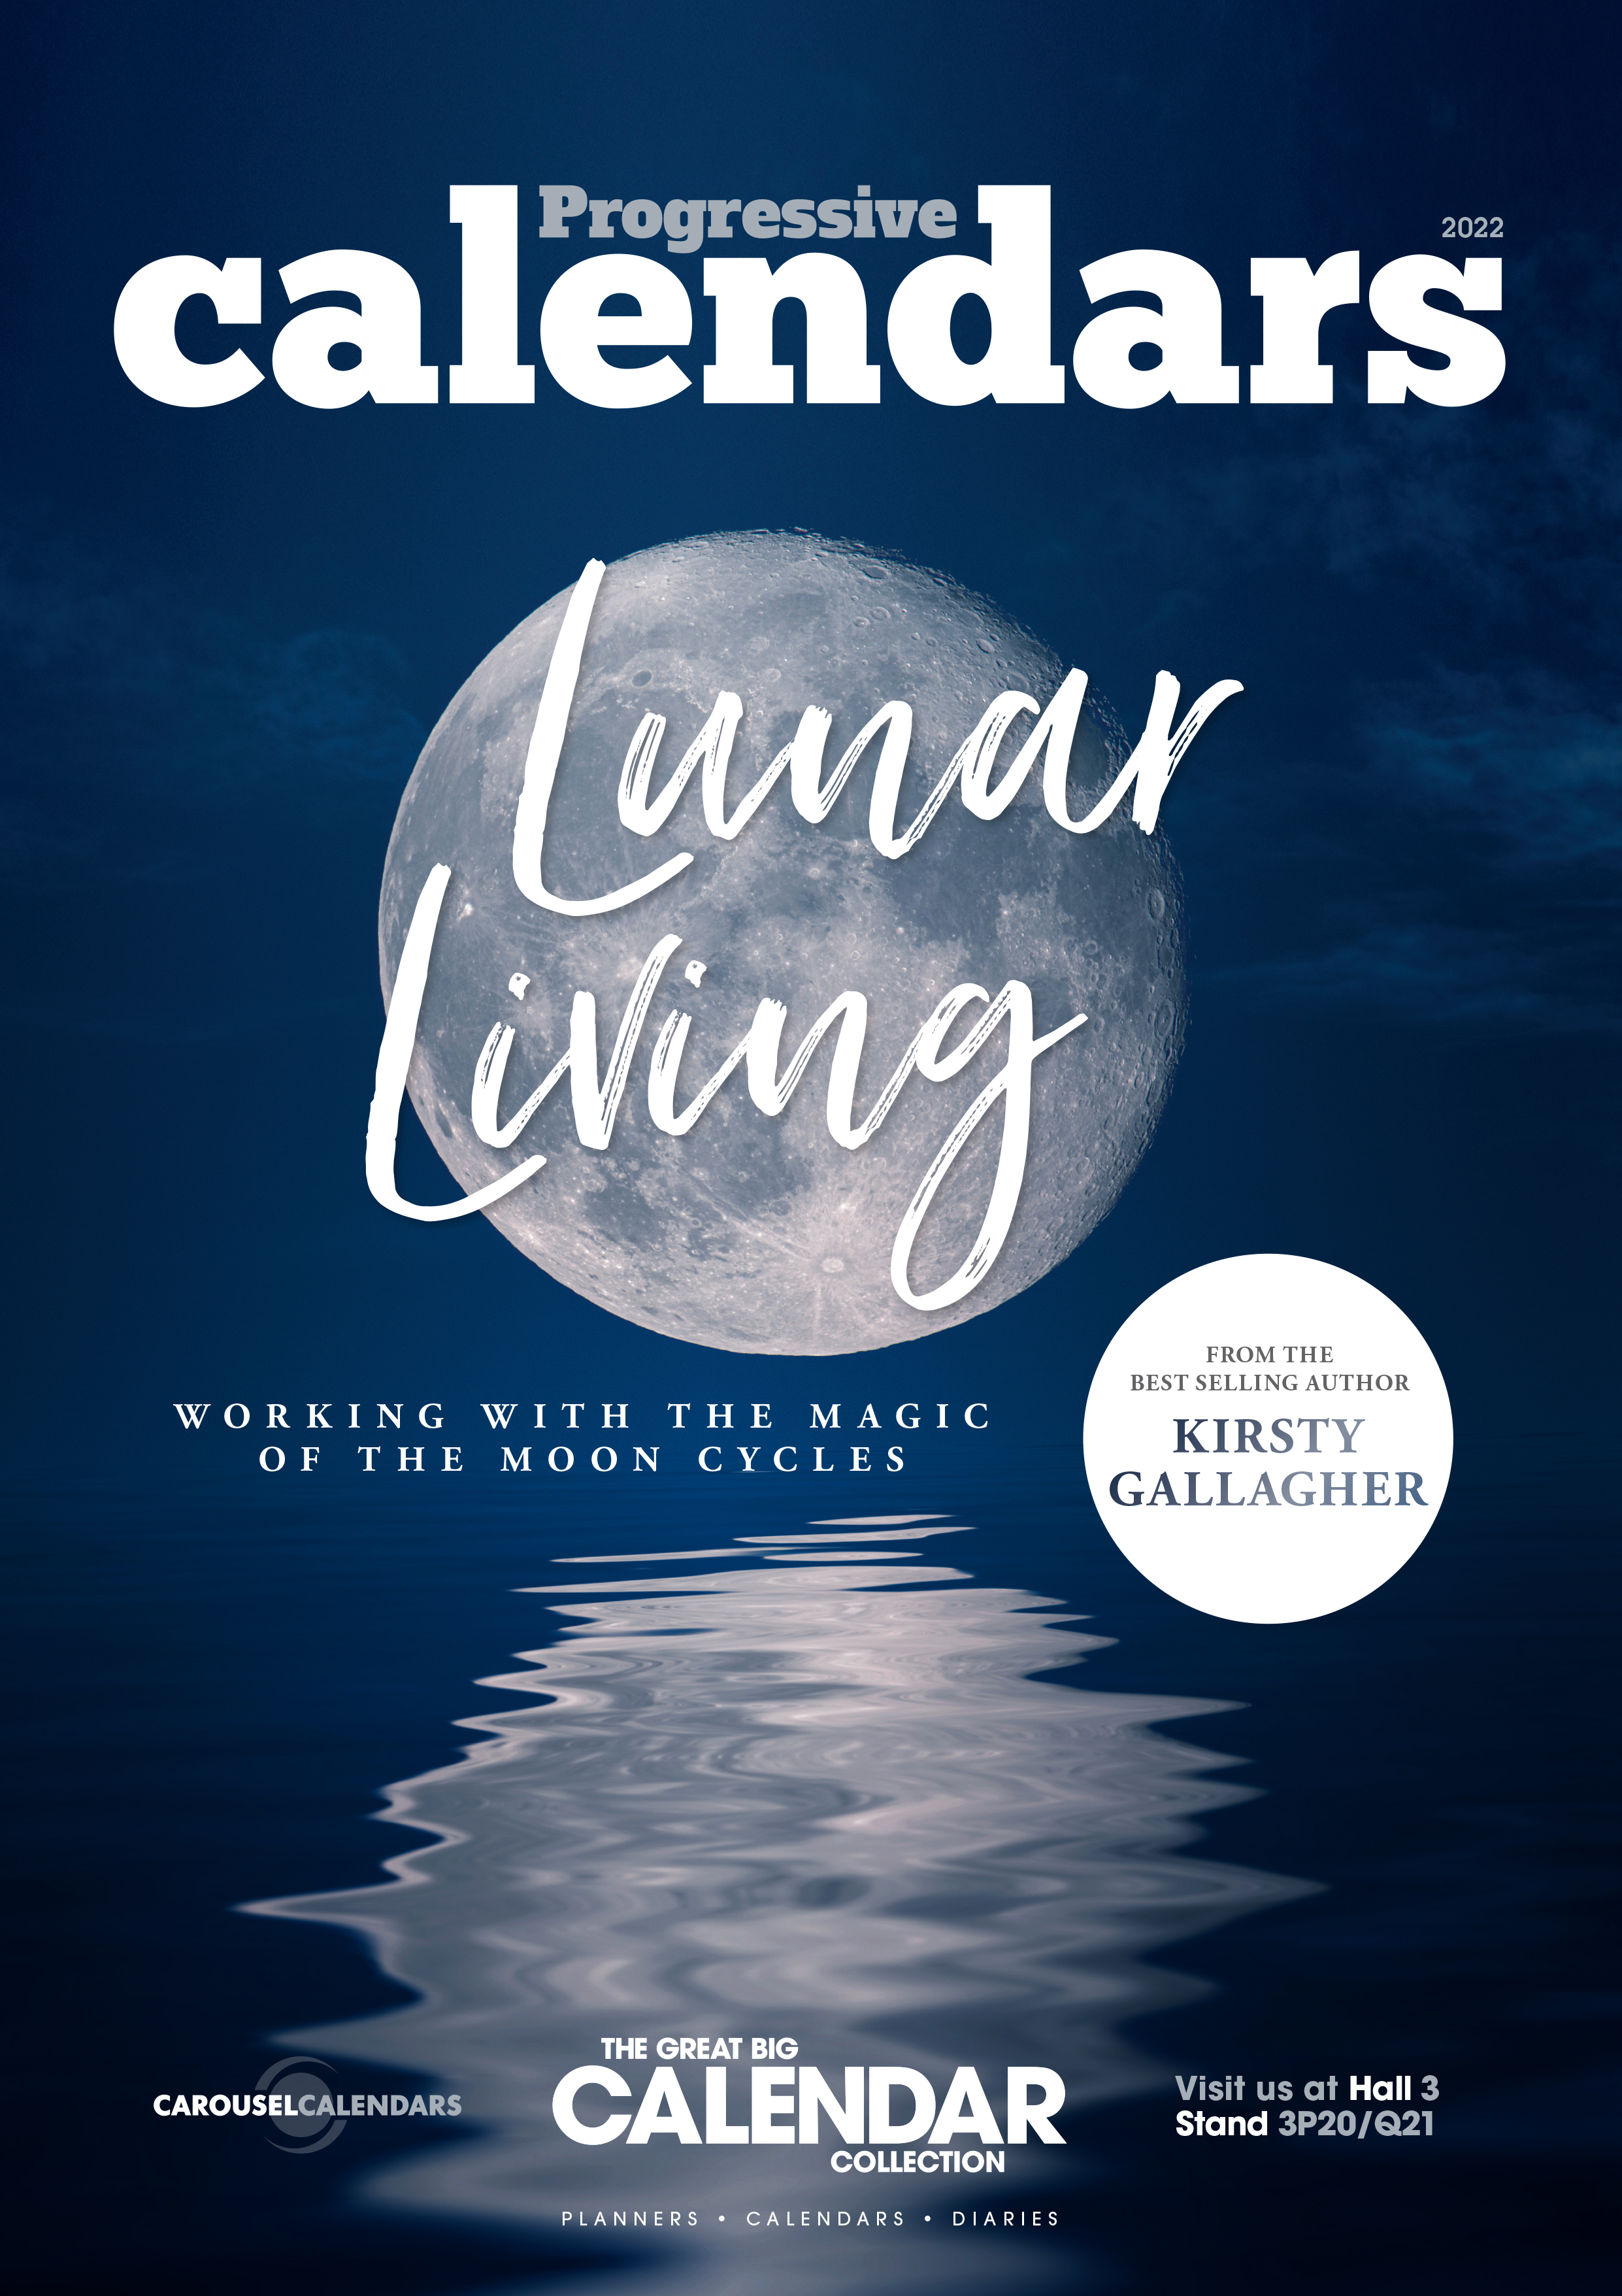 Above: Progressive Calendars covers the developments in the calendar and Advents sector.